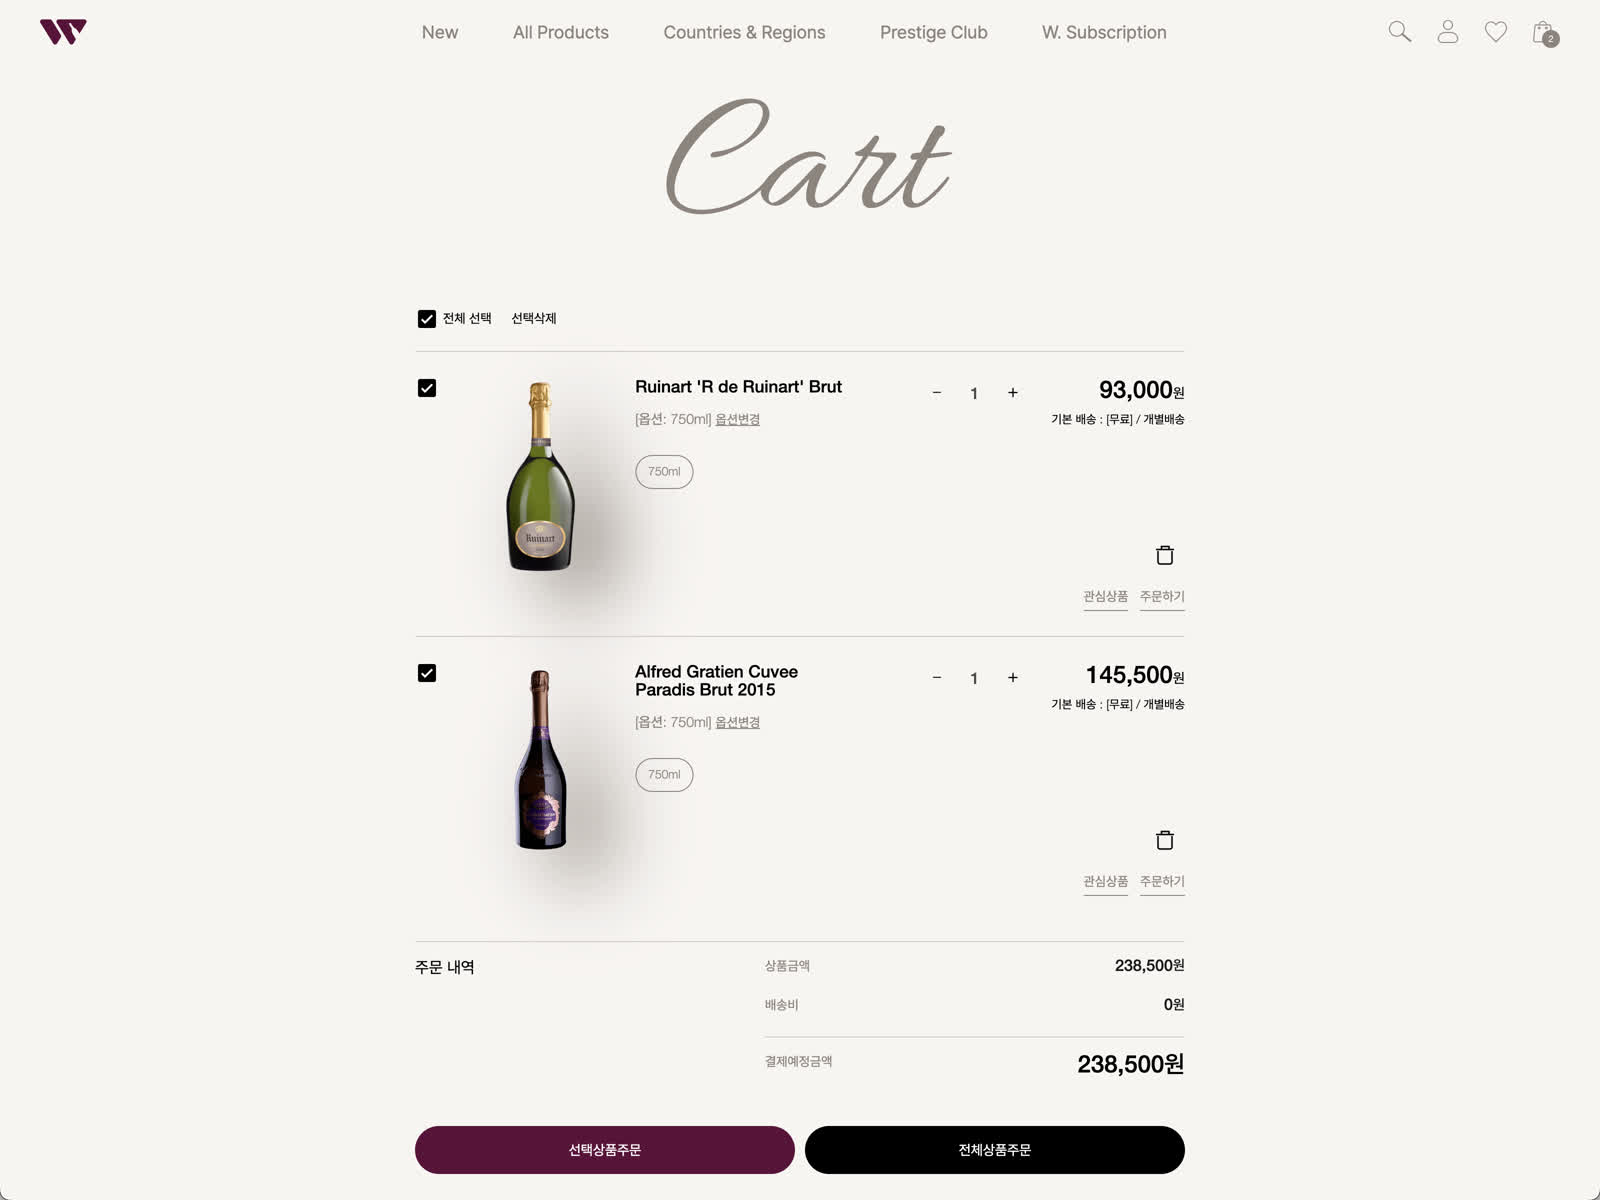 Cart Page